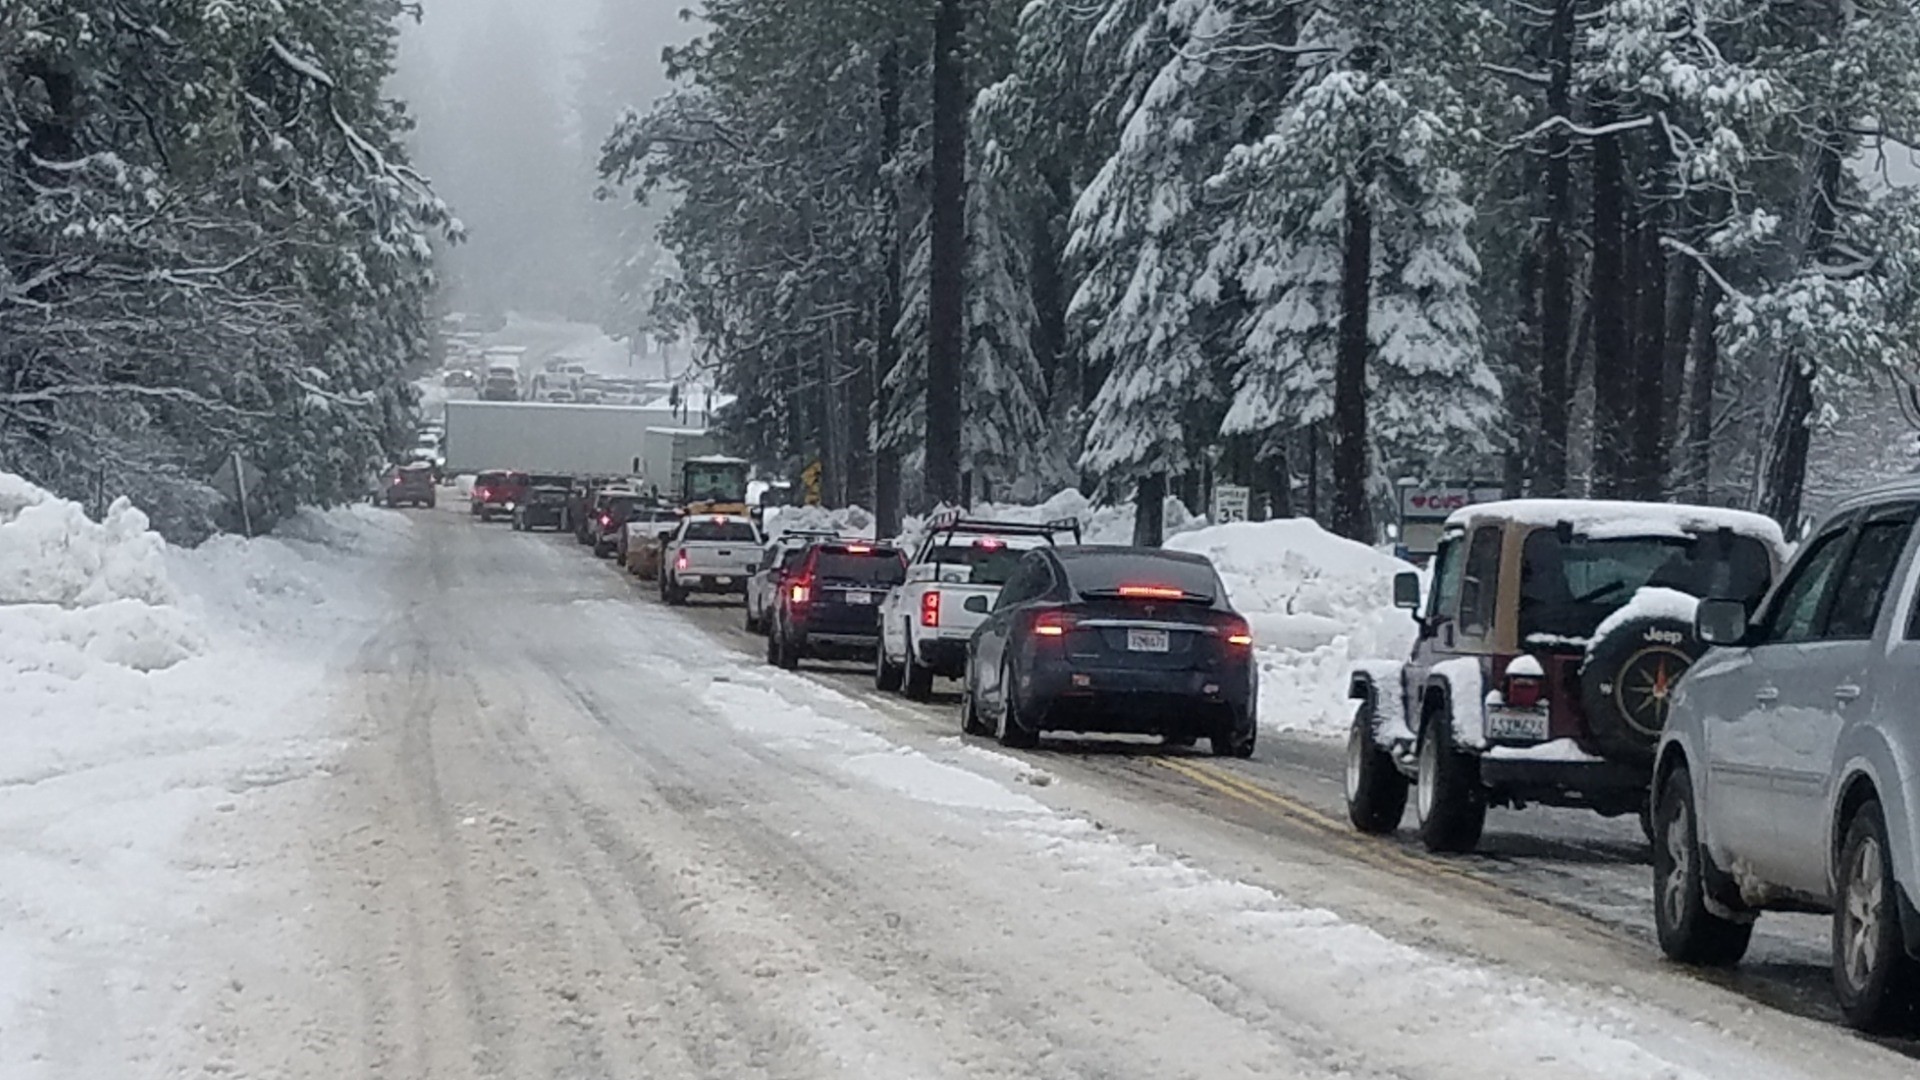 A powerful winter storm turned dangerous and chaotic this past weekend in the Foothills. It took more than eight hours for people to get from Placerville to Tahoe, so many stalled drivers stopped in smaller towns. Pollock Pines was one of those communities.